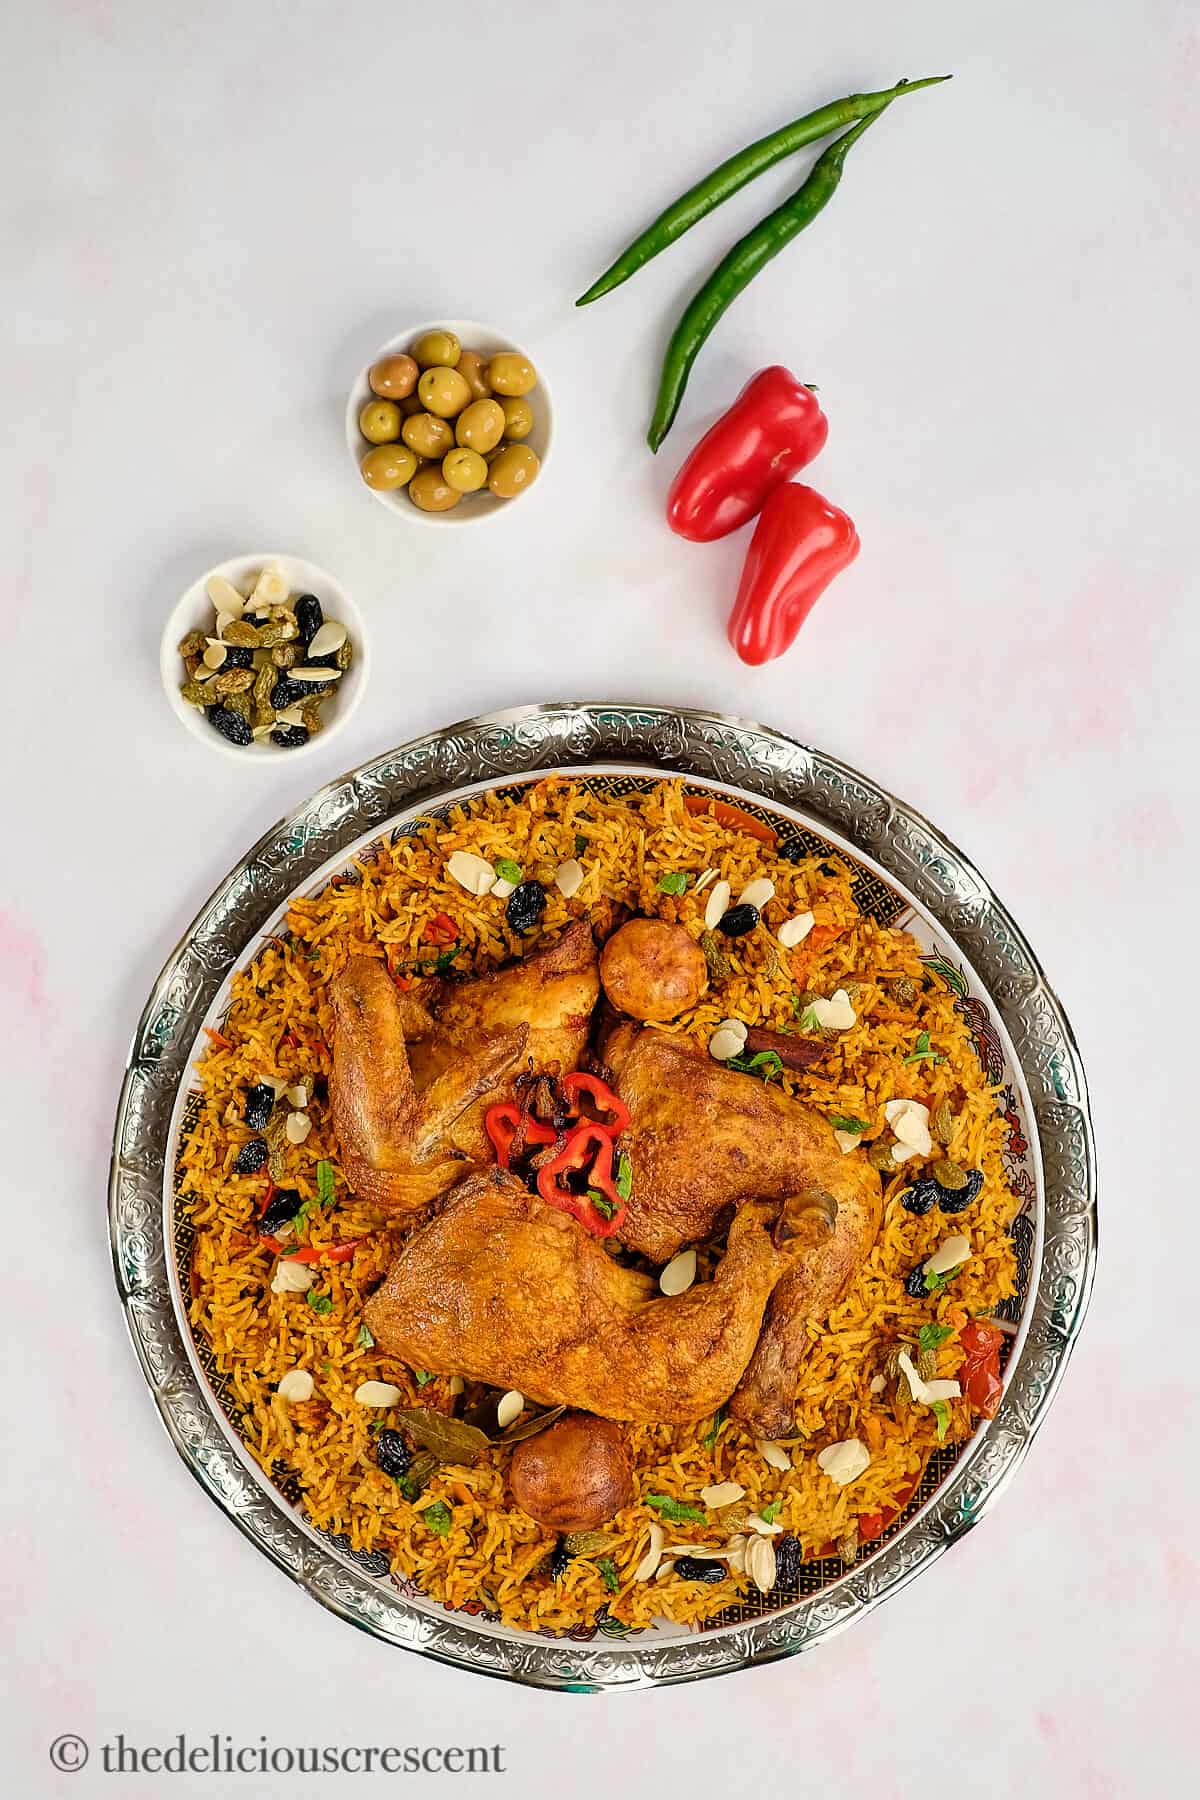 Top view of Arabian rice with browned aromatic chicken.